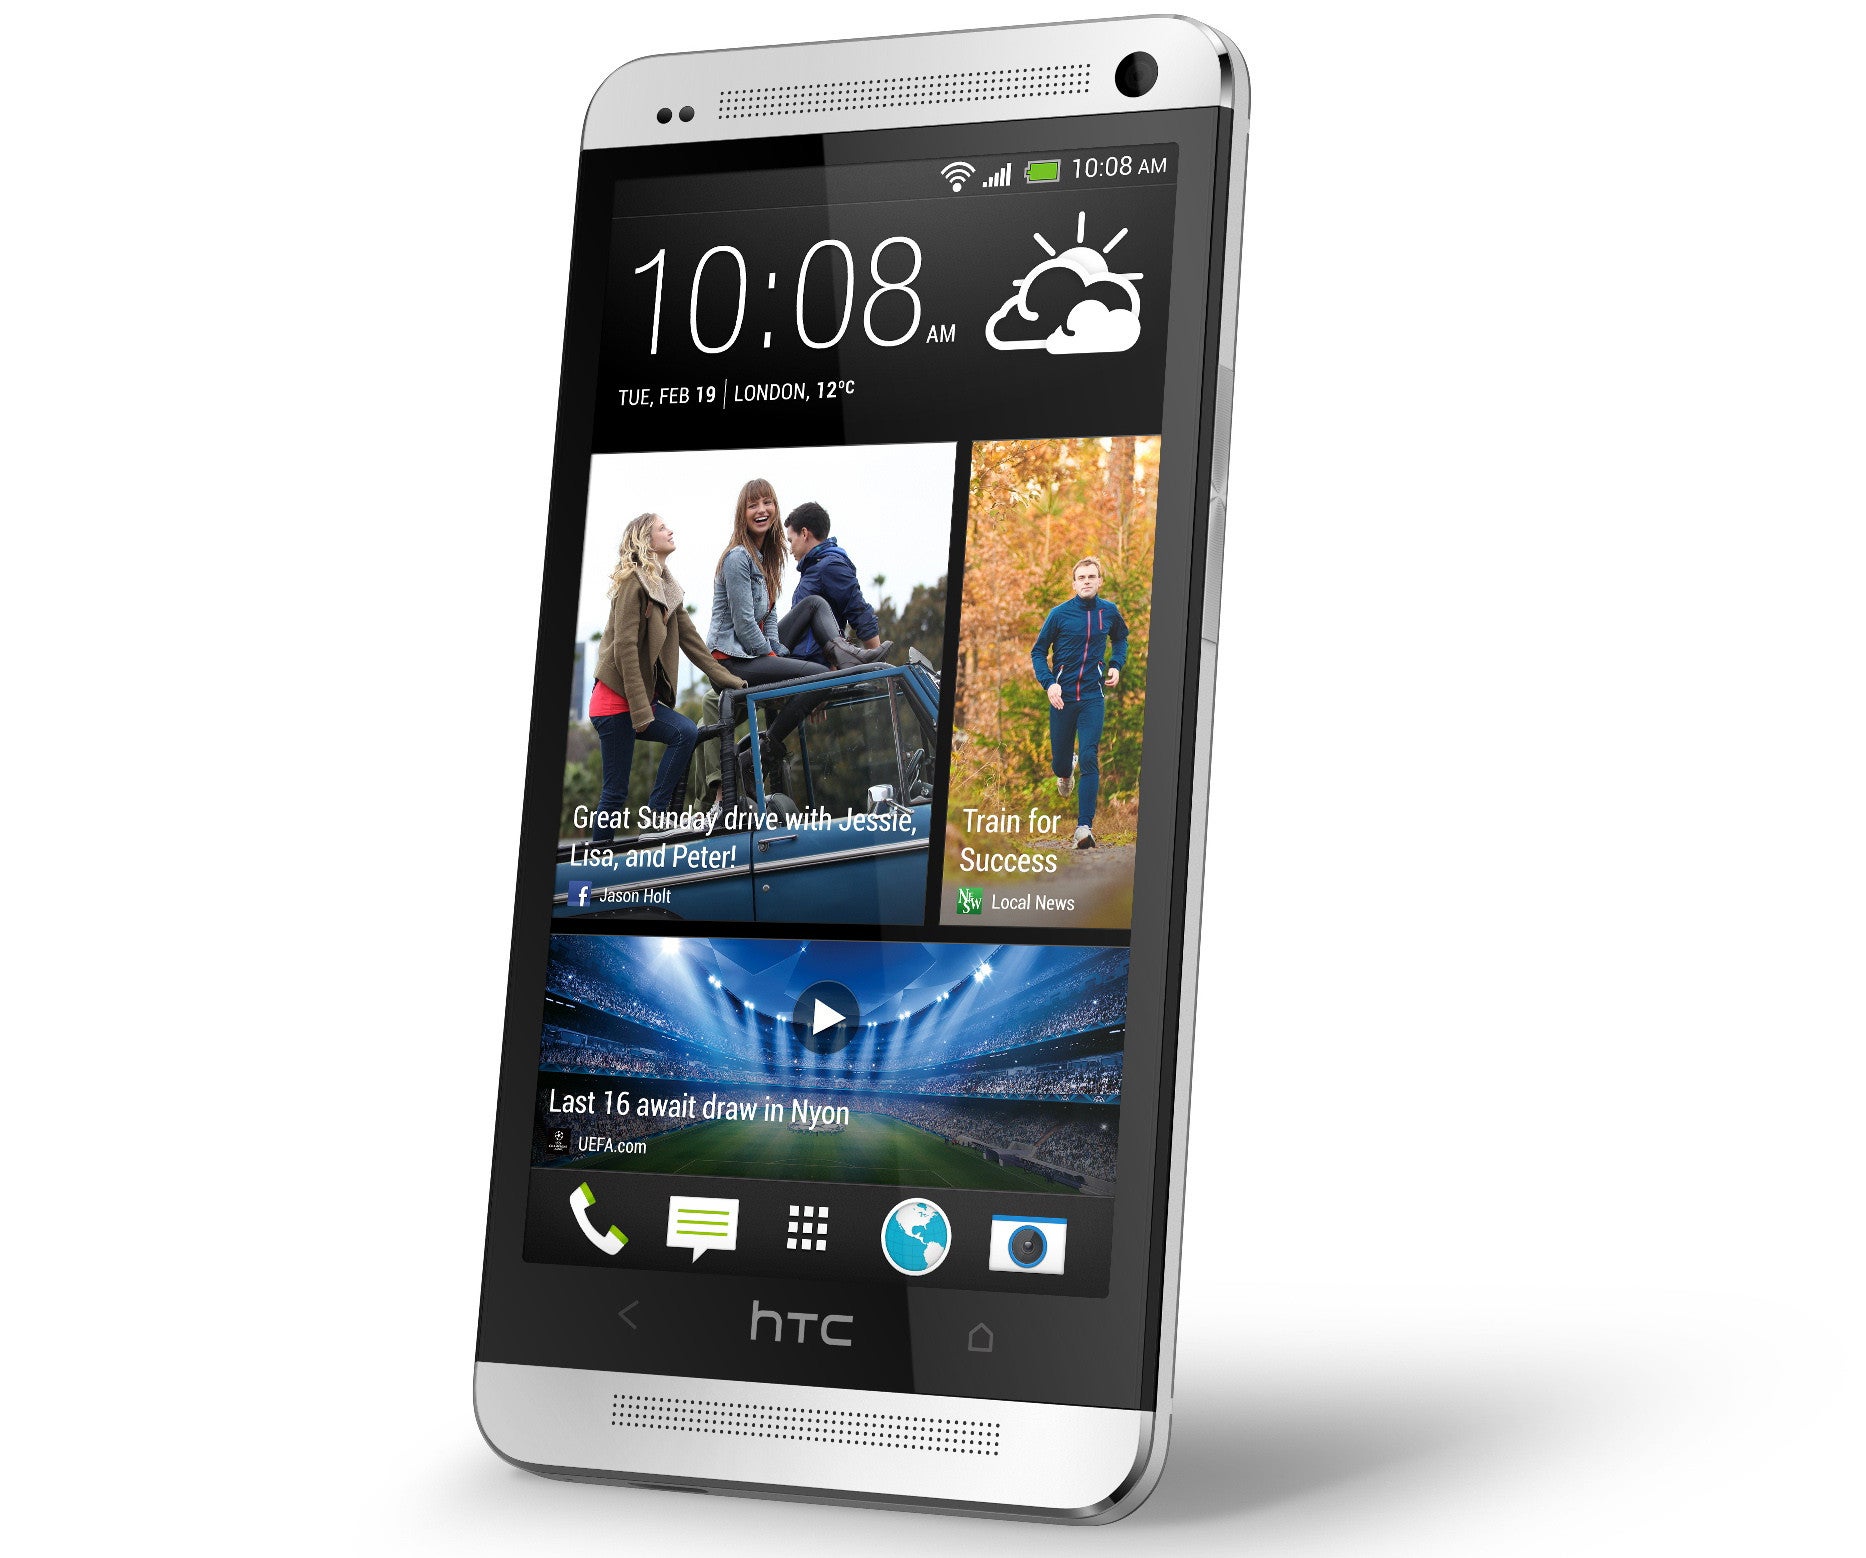 Will the HTC One be coming to Verizon? - Is the HTC One coming to Verizon on May 22nd?